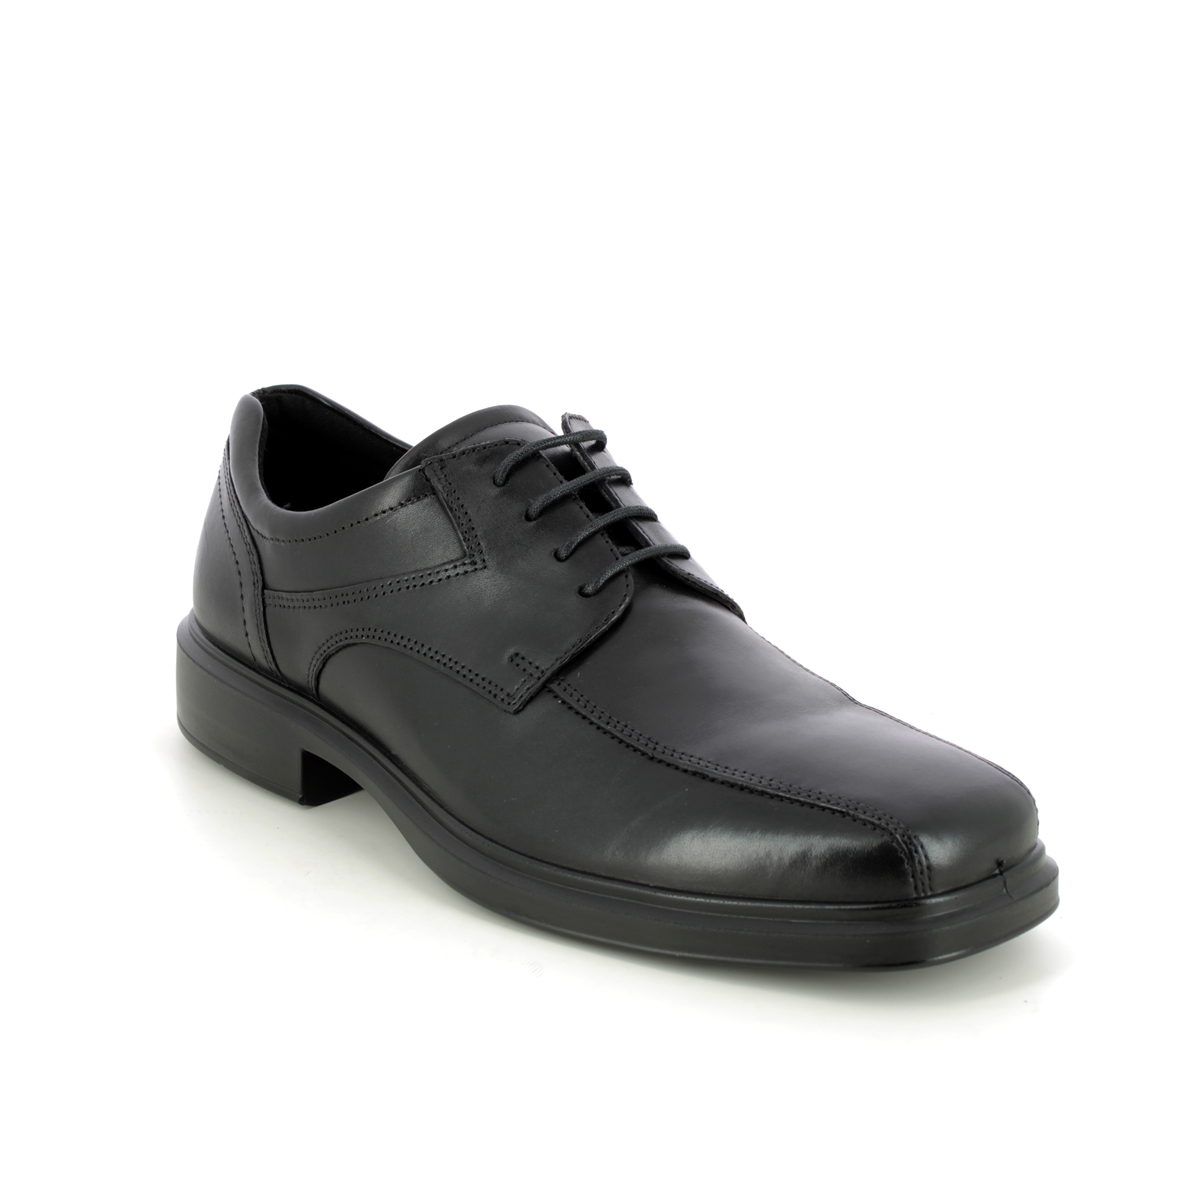 ECCO Helsinki 2 Tram Black leather Mens formal shoes 500174-01001 in a Plain Leather in Size 40